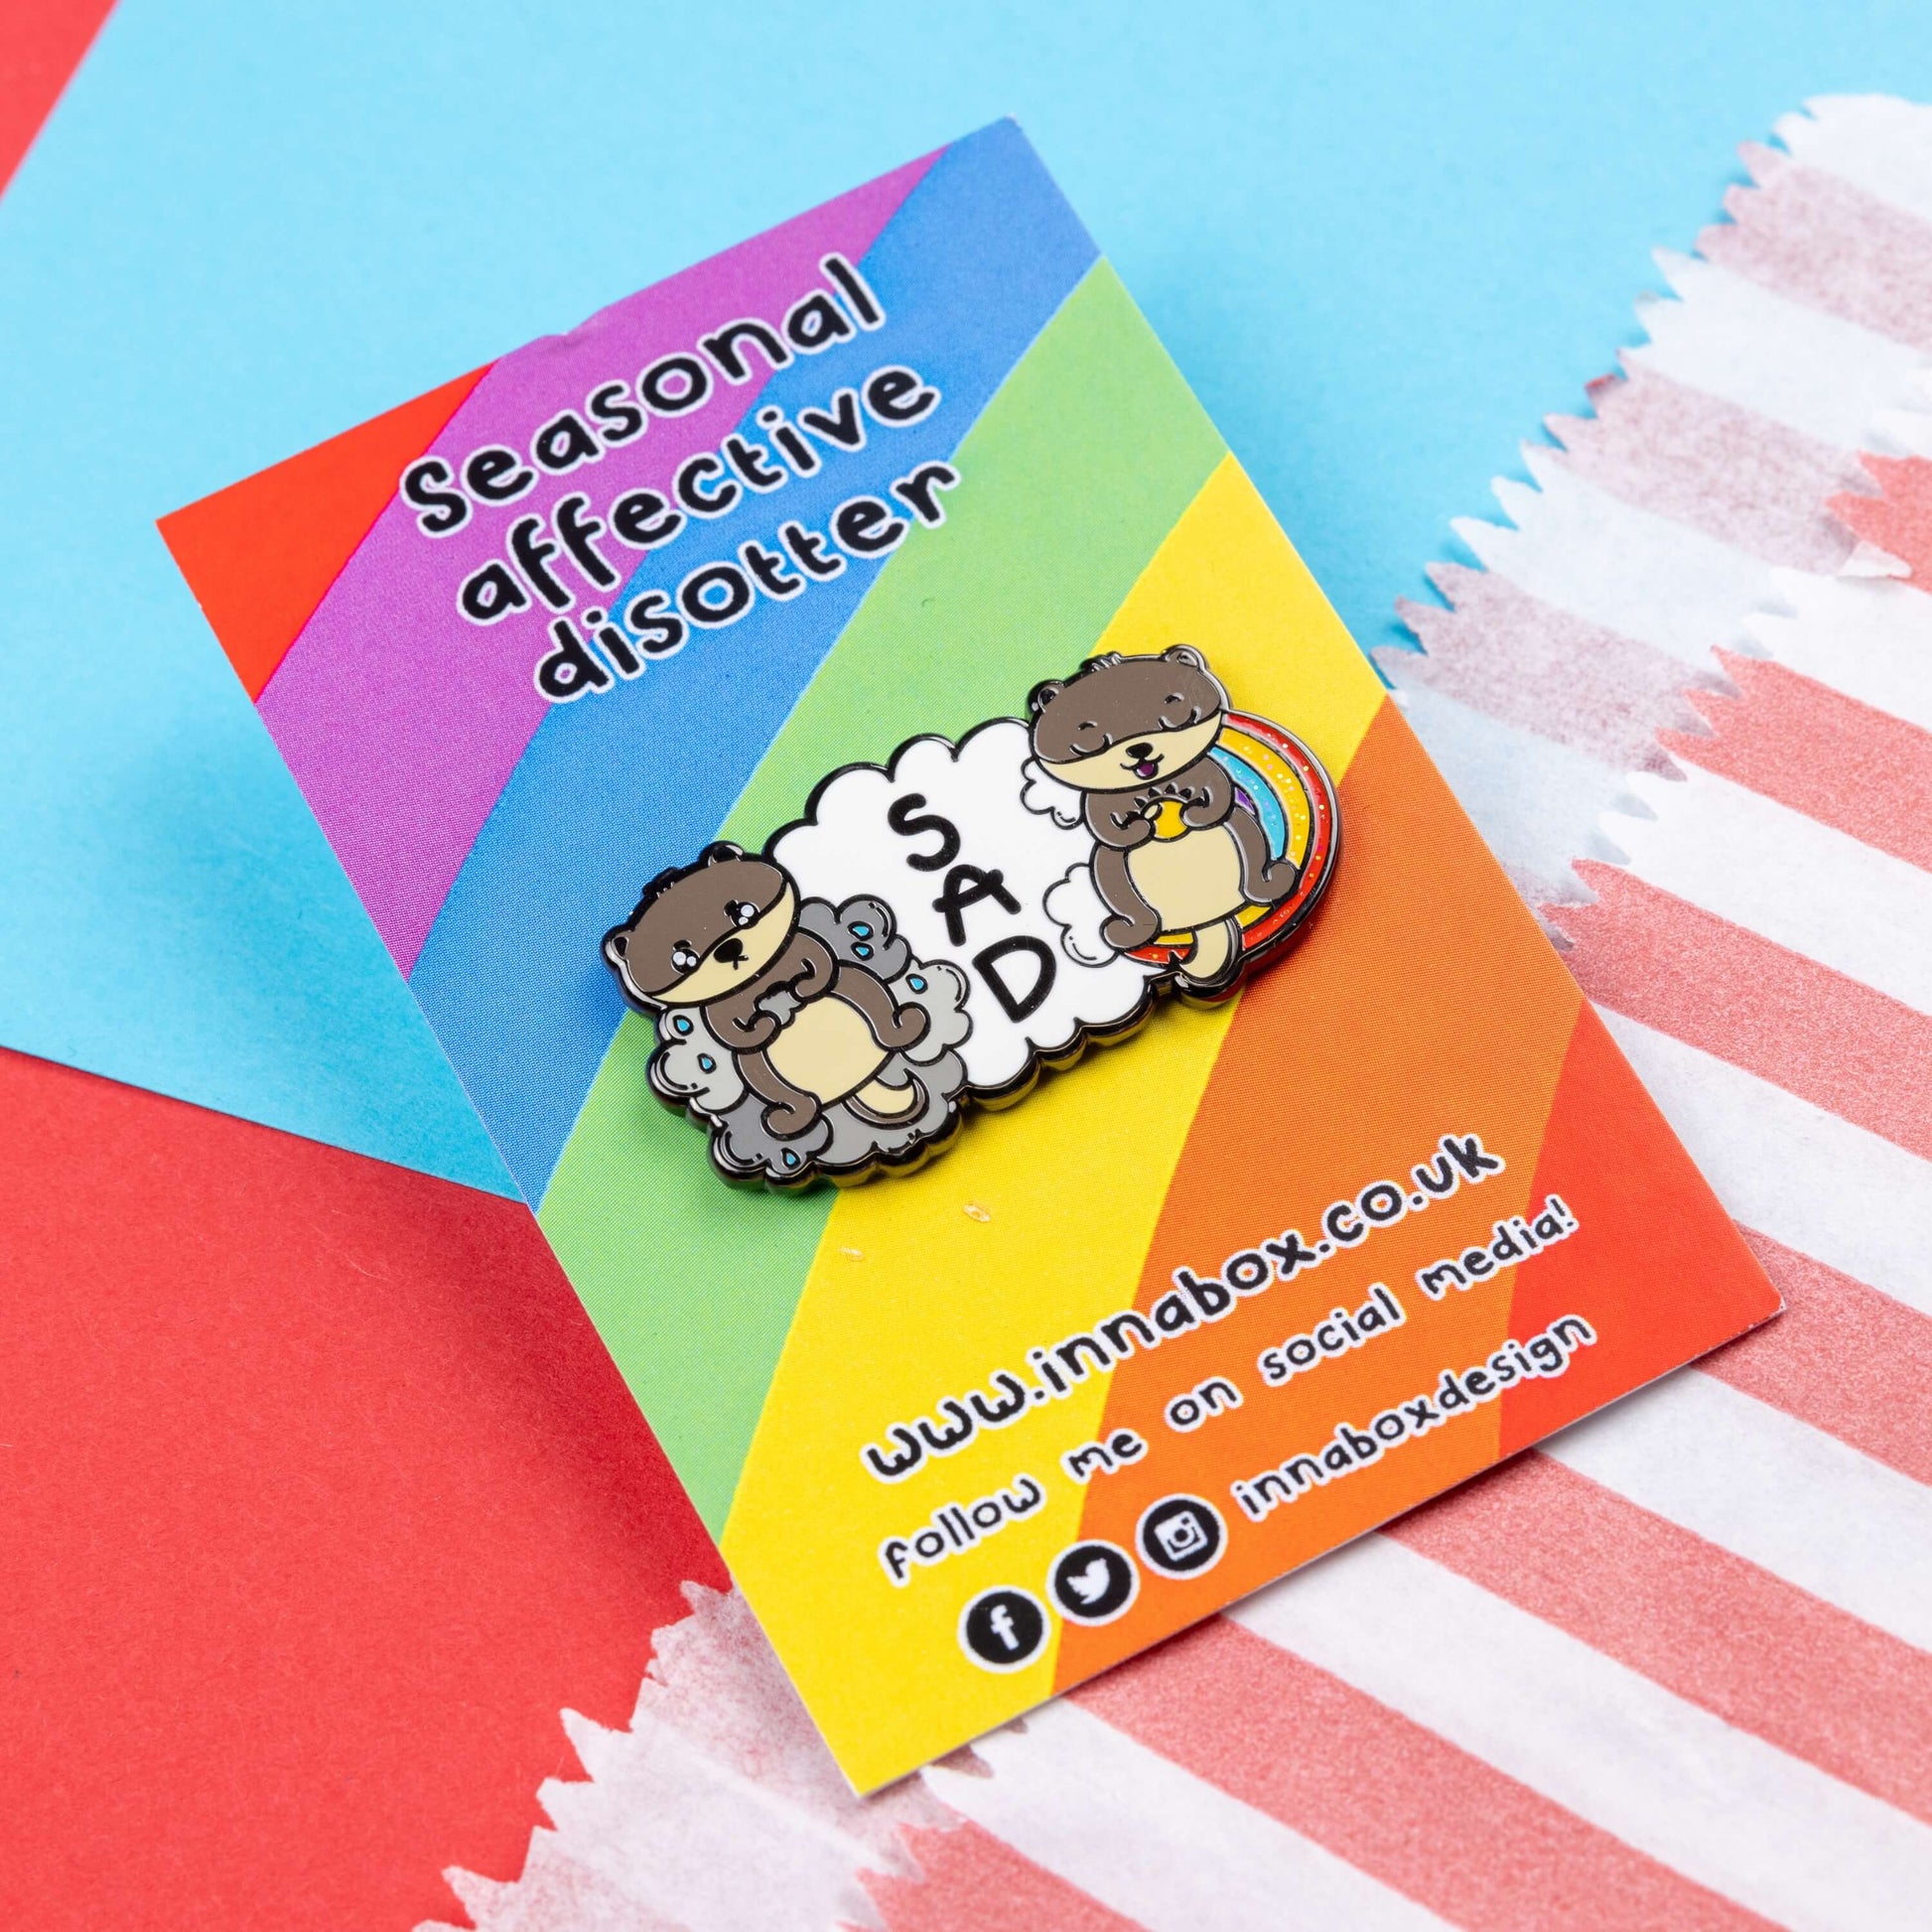 The Seasonal Affective Otter Enamel Pin - Seasonal Affective Disorder SAD on rainbow backing card laid on a red and blue card background. The cloud shaped pin has two otters on either side, one sad on a raincloud clutching a raincloud and the other smiling on a rainbow clutching a sunshine. In the middle is the initials 'SAD'. The hand drawn design is raising awareness for Seasonal Affective Disorder.